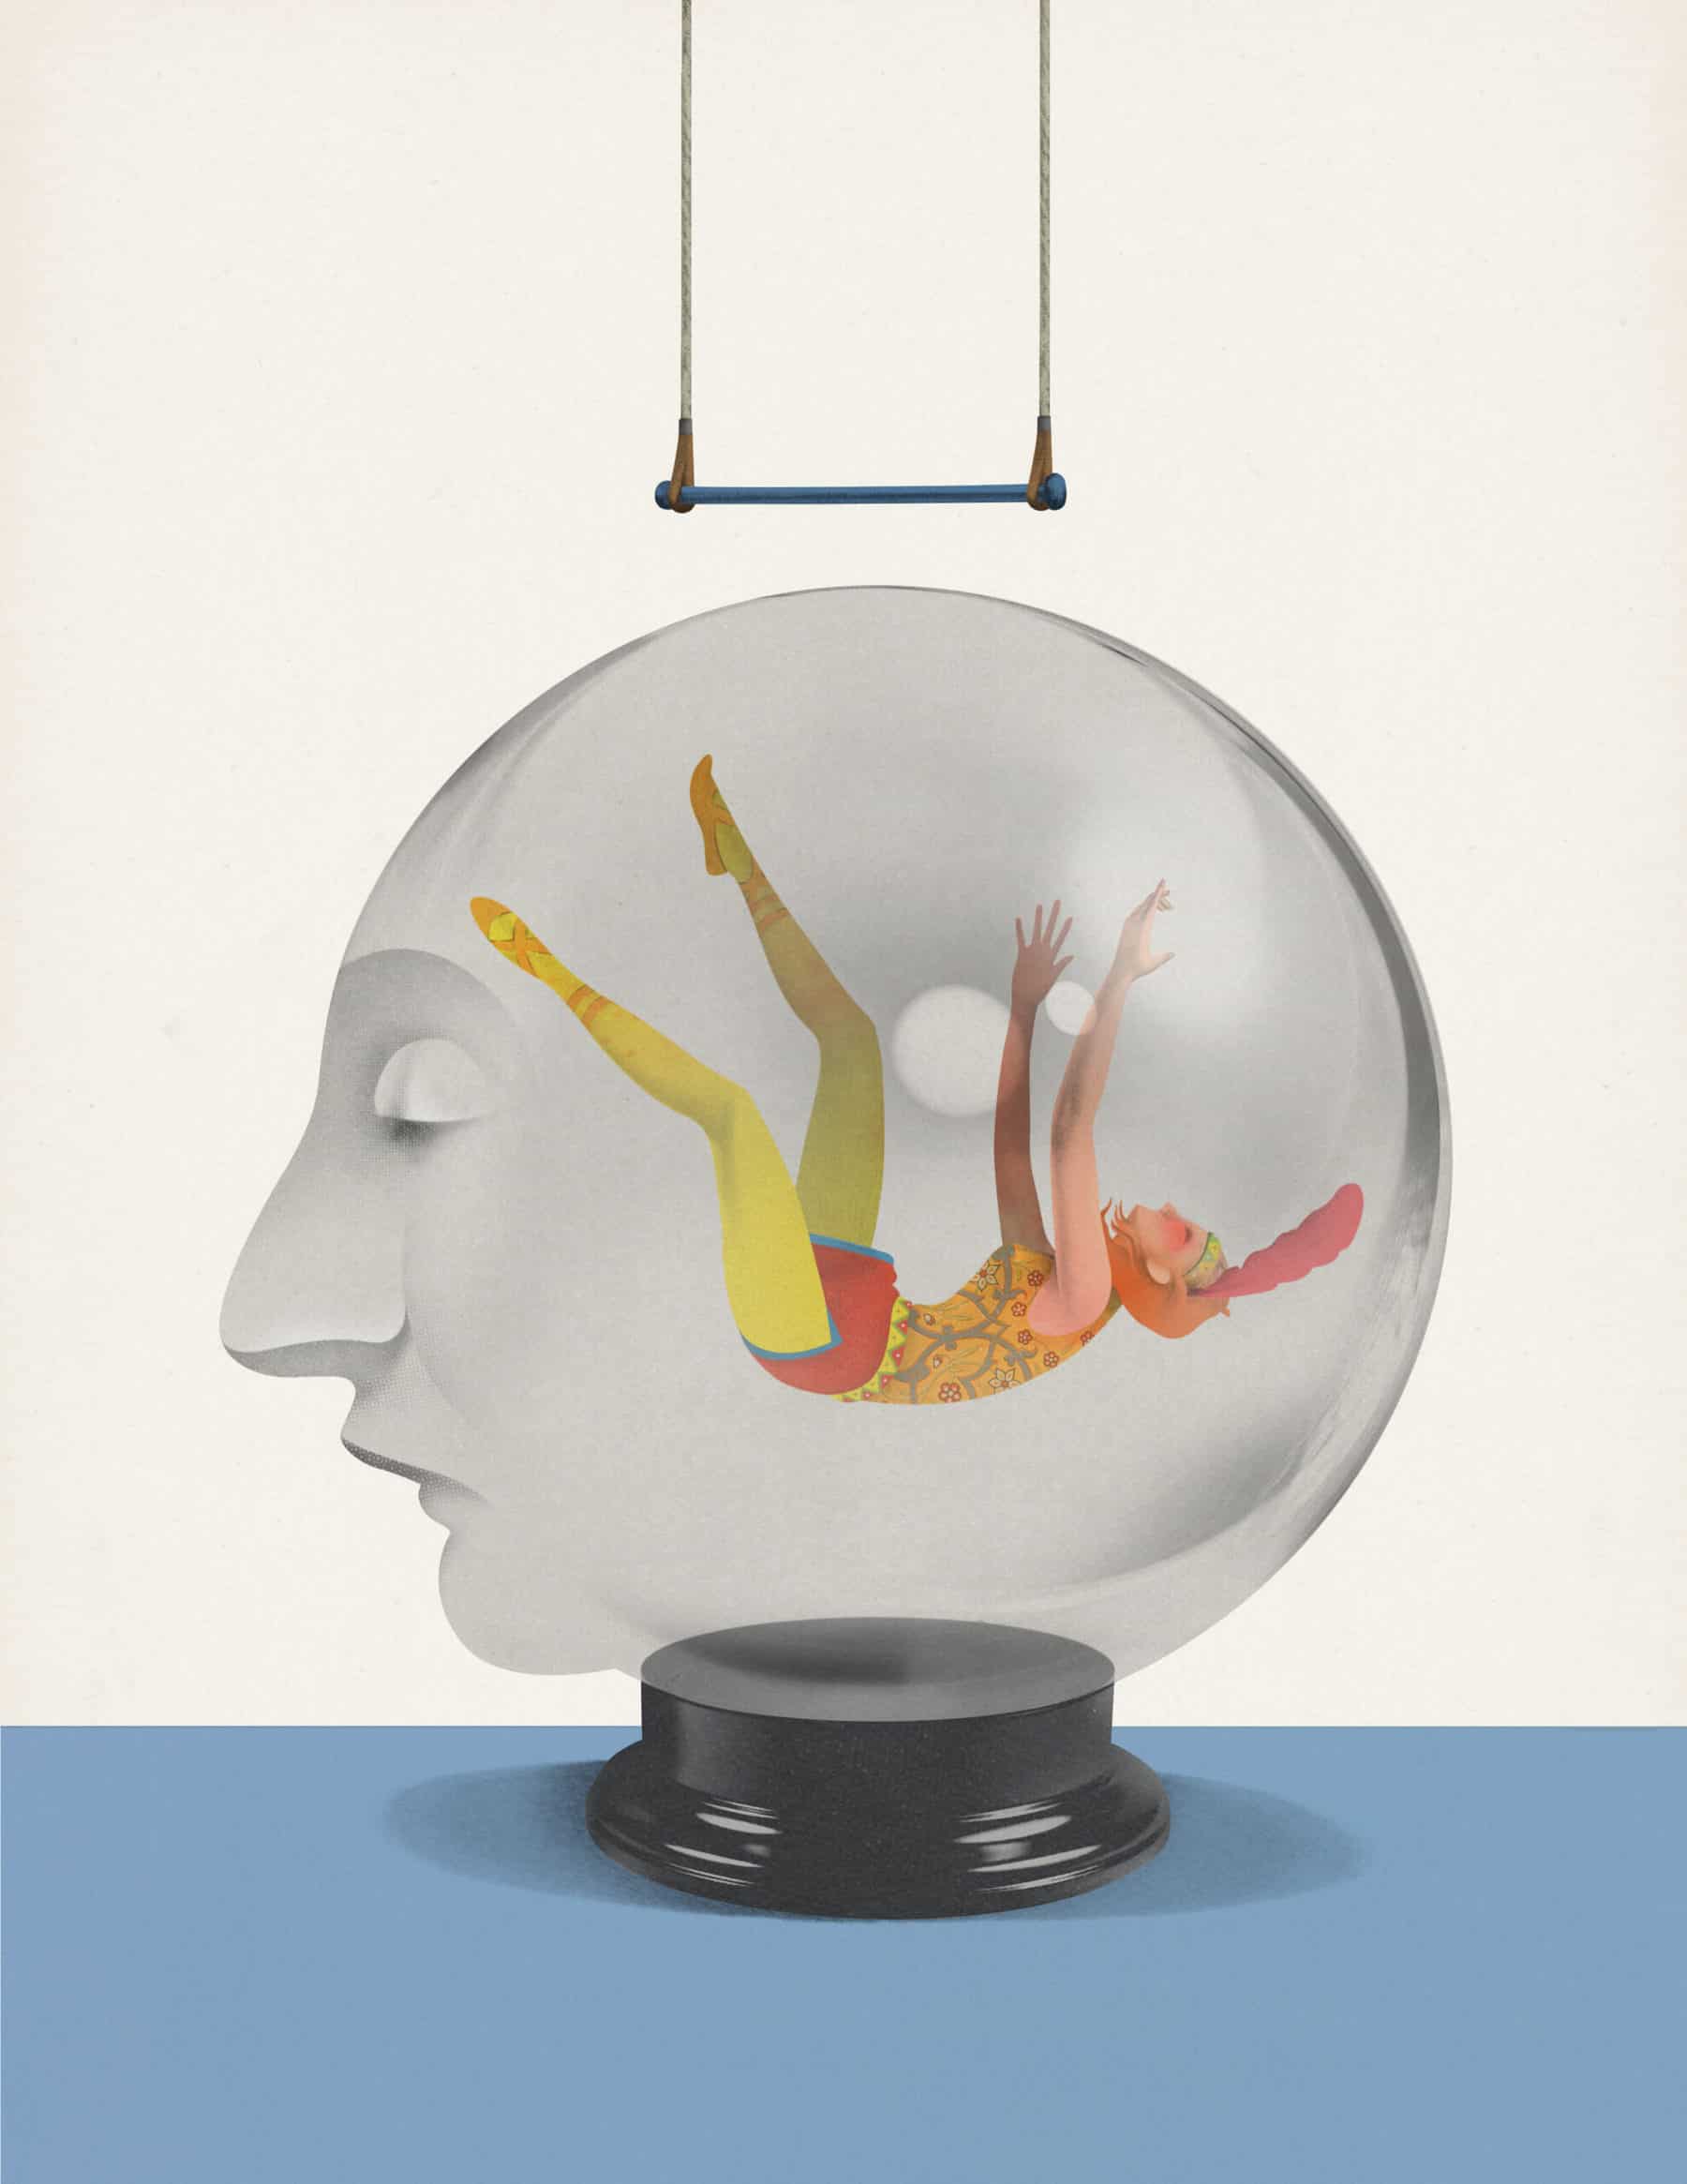 an image of a crystal ball with trapeze artist inside ill rated by Brett Ryder